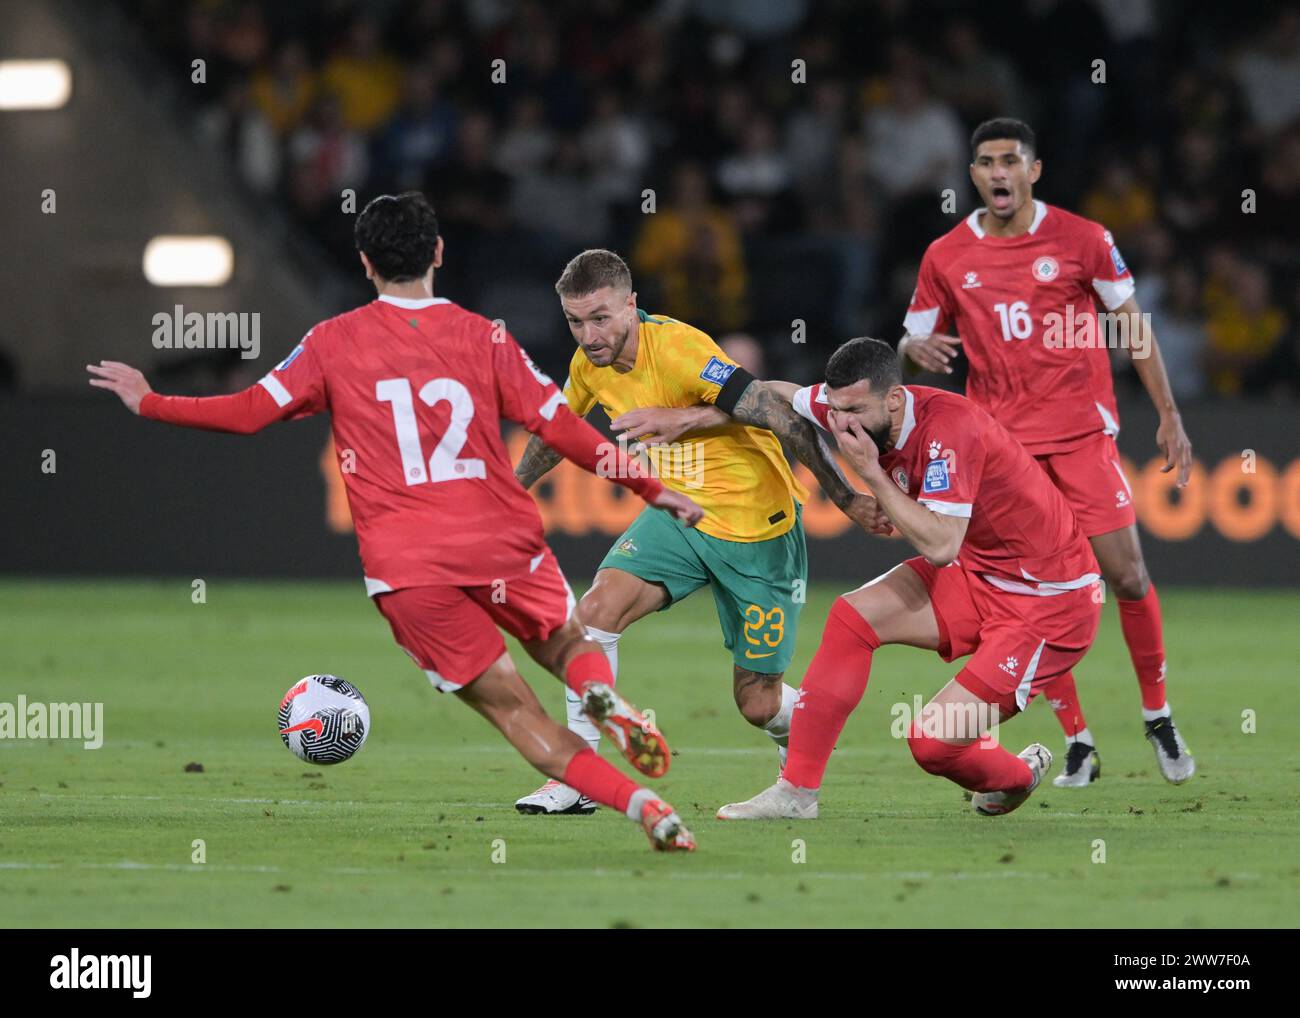 Hasan Srour (L), Maher Sabra (R) of Lebanon football team and Adam Taggart (M) of Australia football team are seen in action during the FIFA World Cup 2026 Qualifier Round 2 match between Australia and Lebanon held at the CommBank Stadium. Final score; Australia 2:0 Lebanon. (Photo by Luis Veniegra / SOPA Images/Sipa USA) Stock Photo